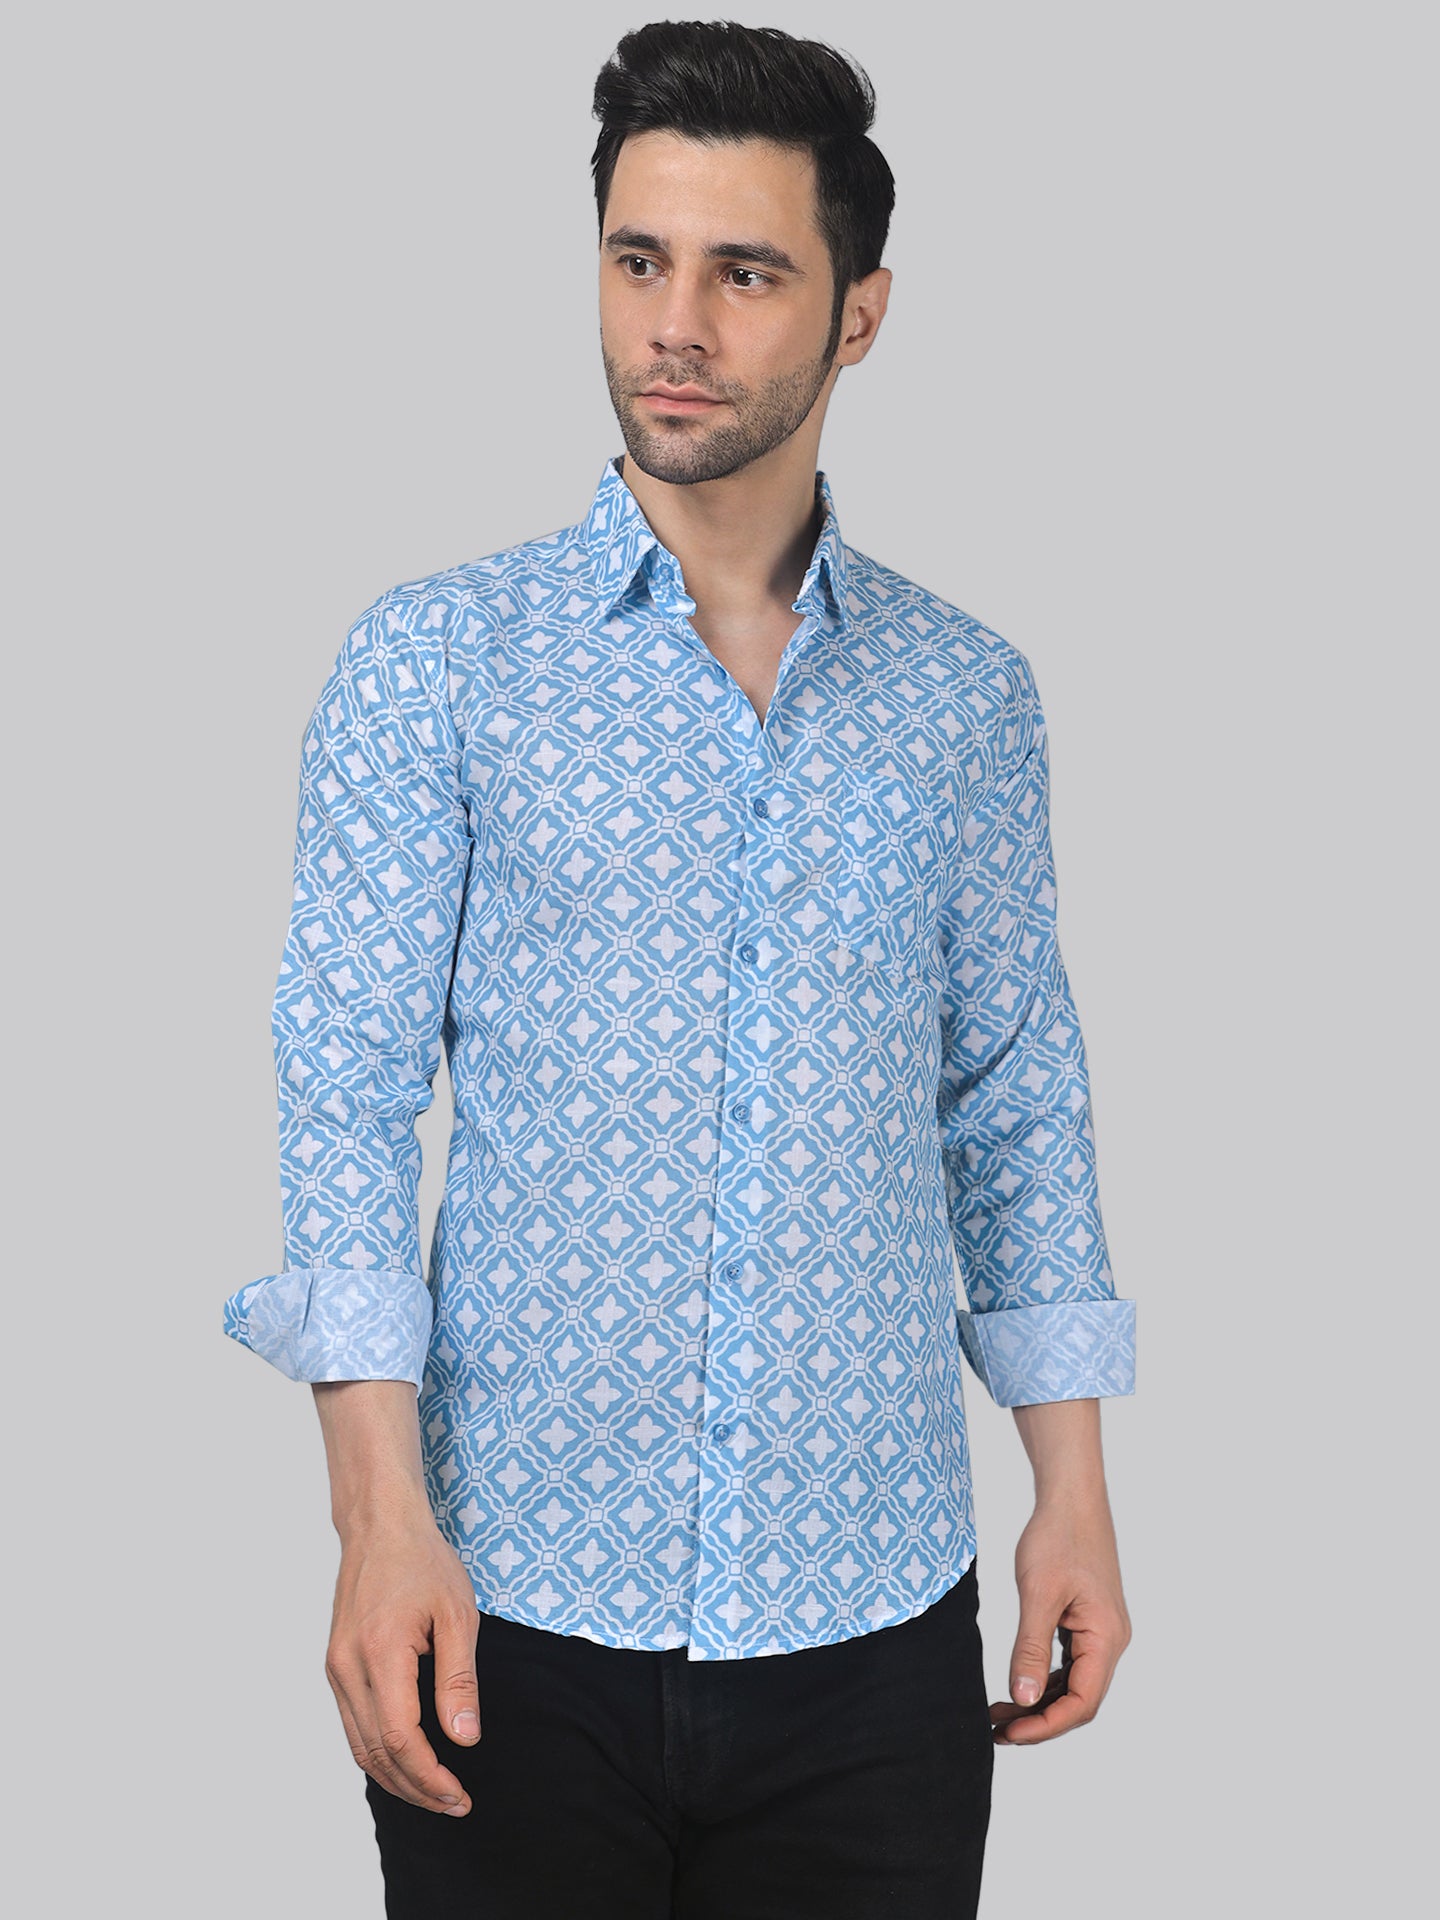 Are there any special care instructions for washing and maintaining poplin fabric shirts?